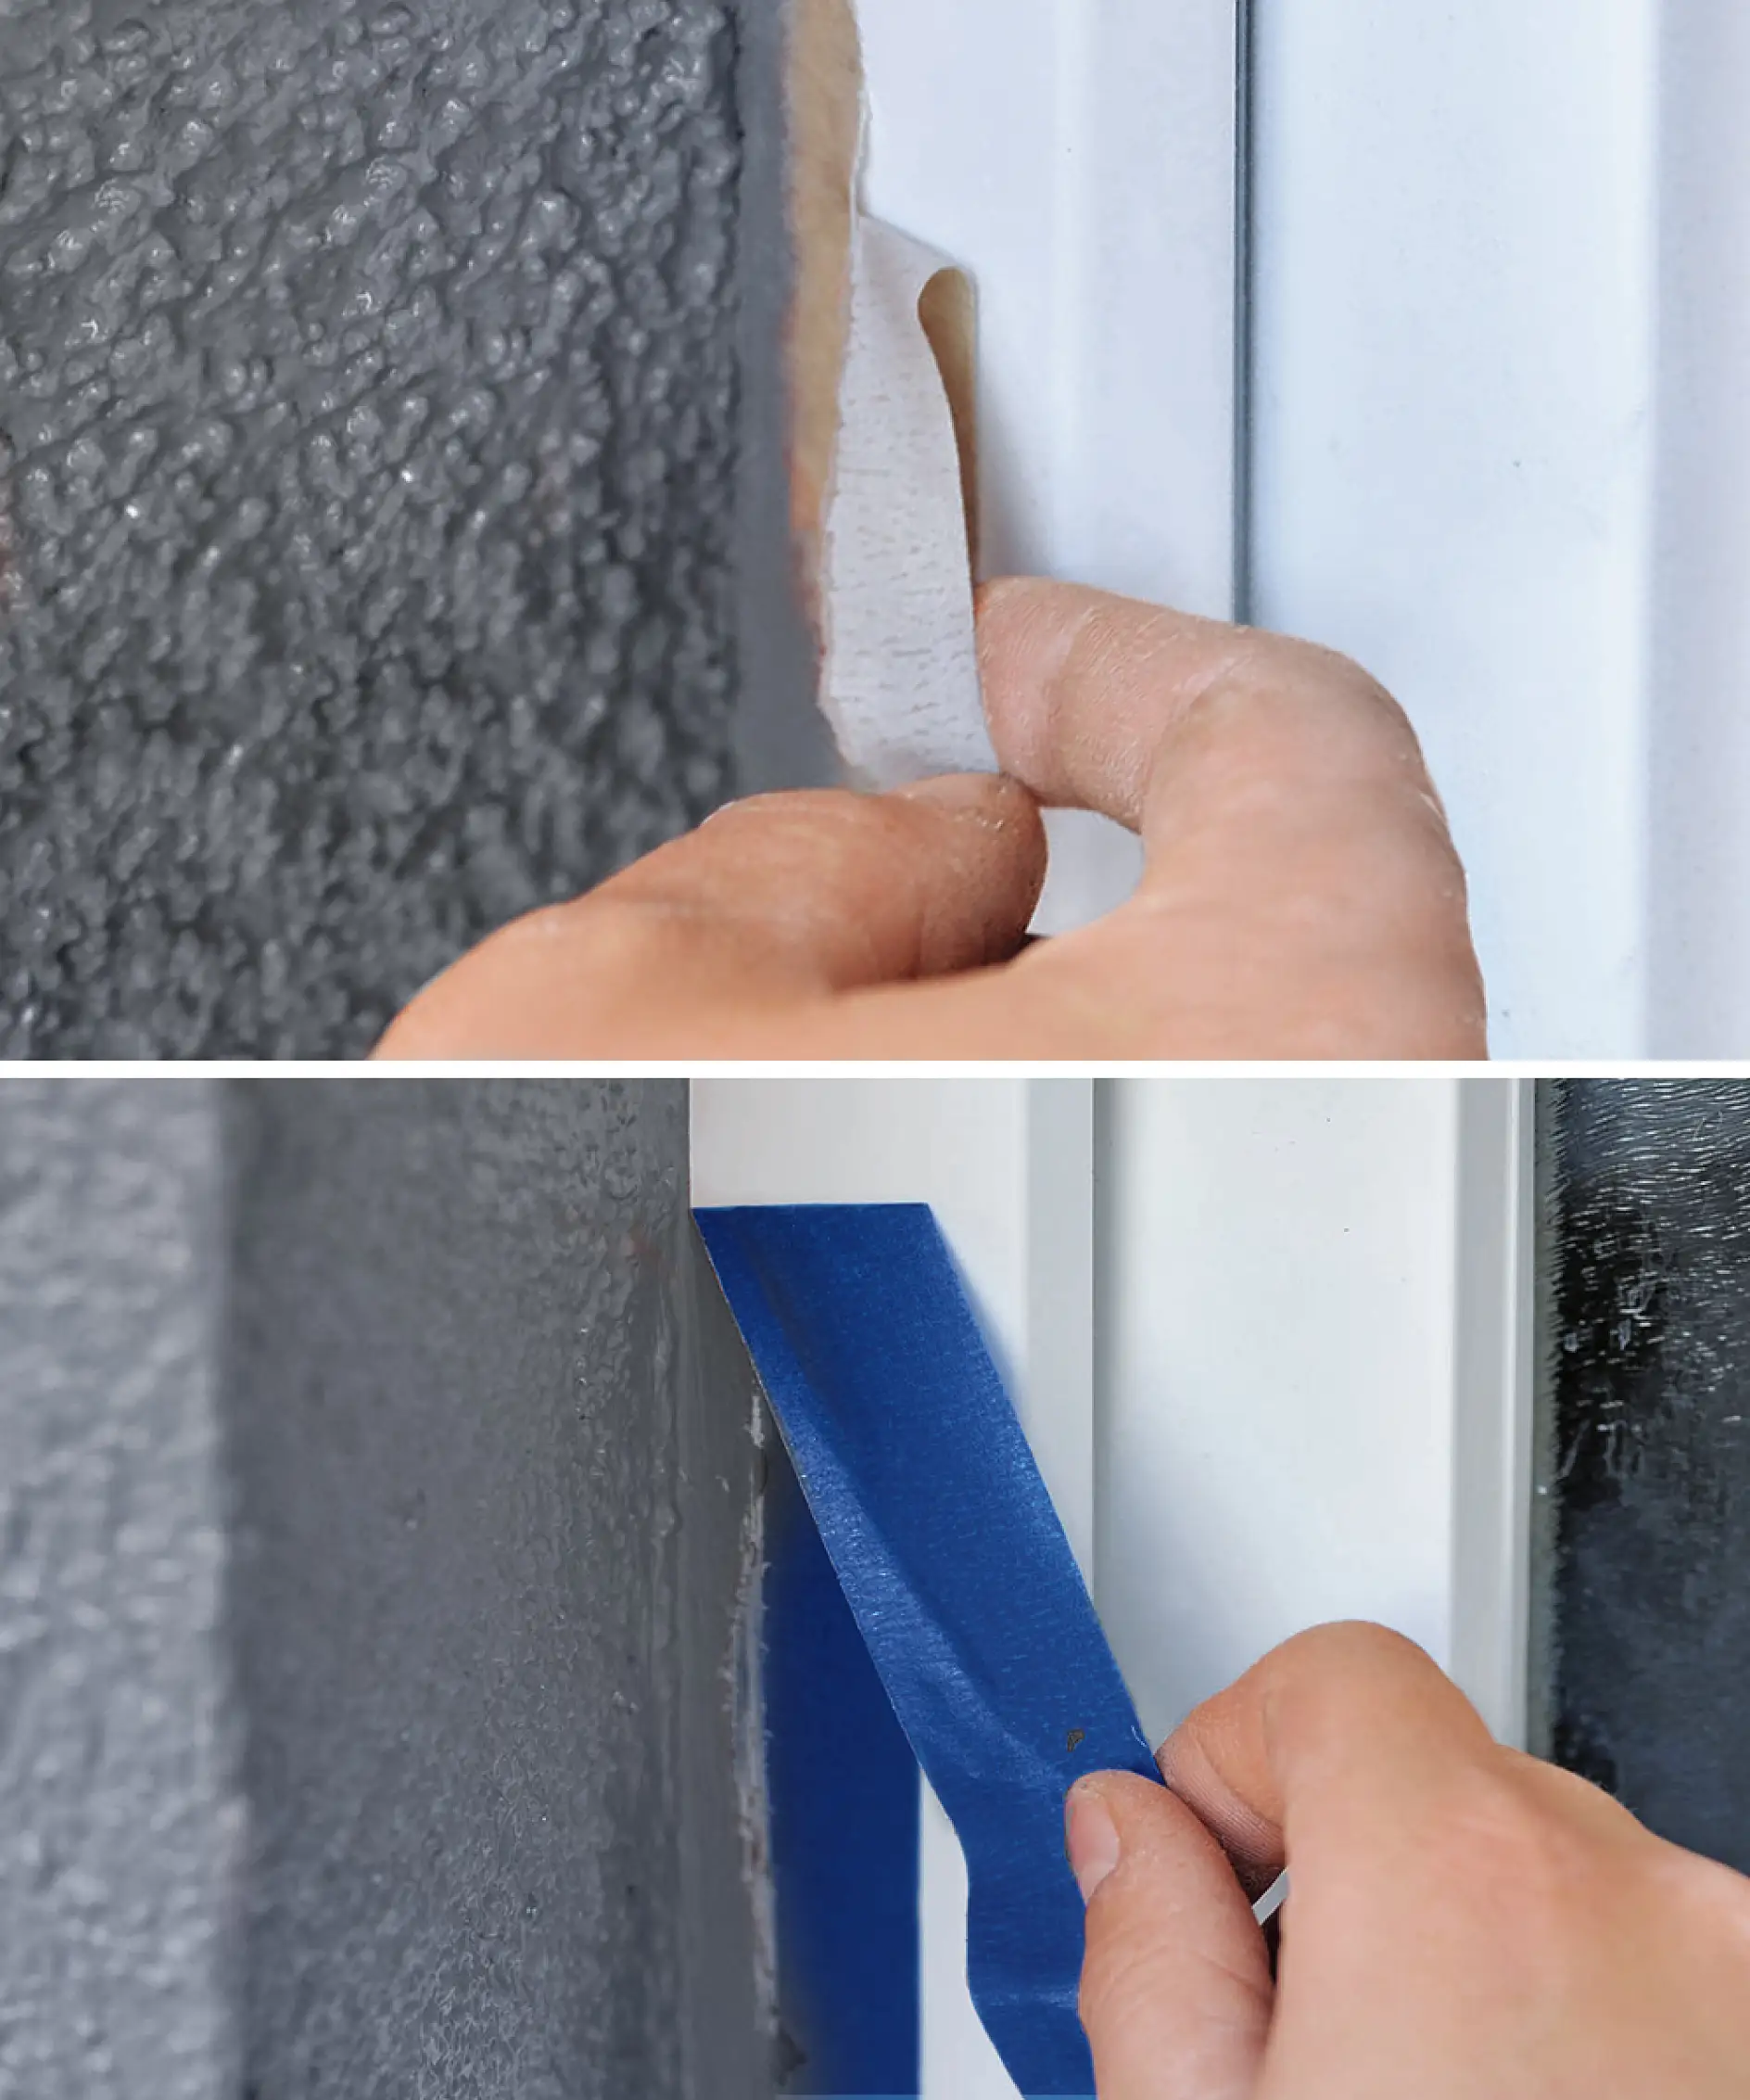 Masking on PVC Windows can be tricky when using the wrong tape.